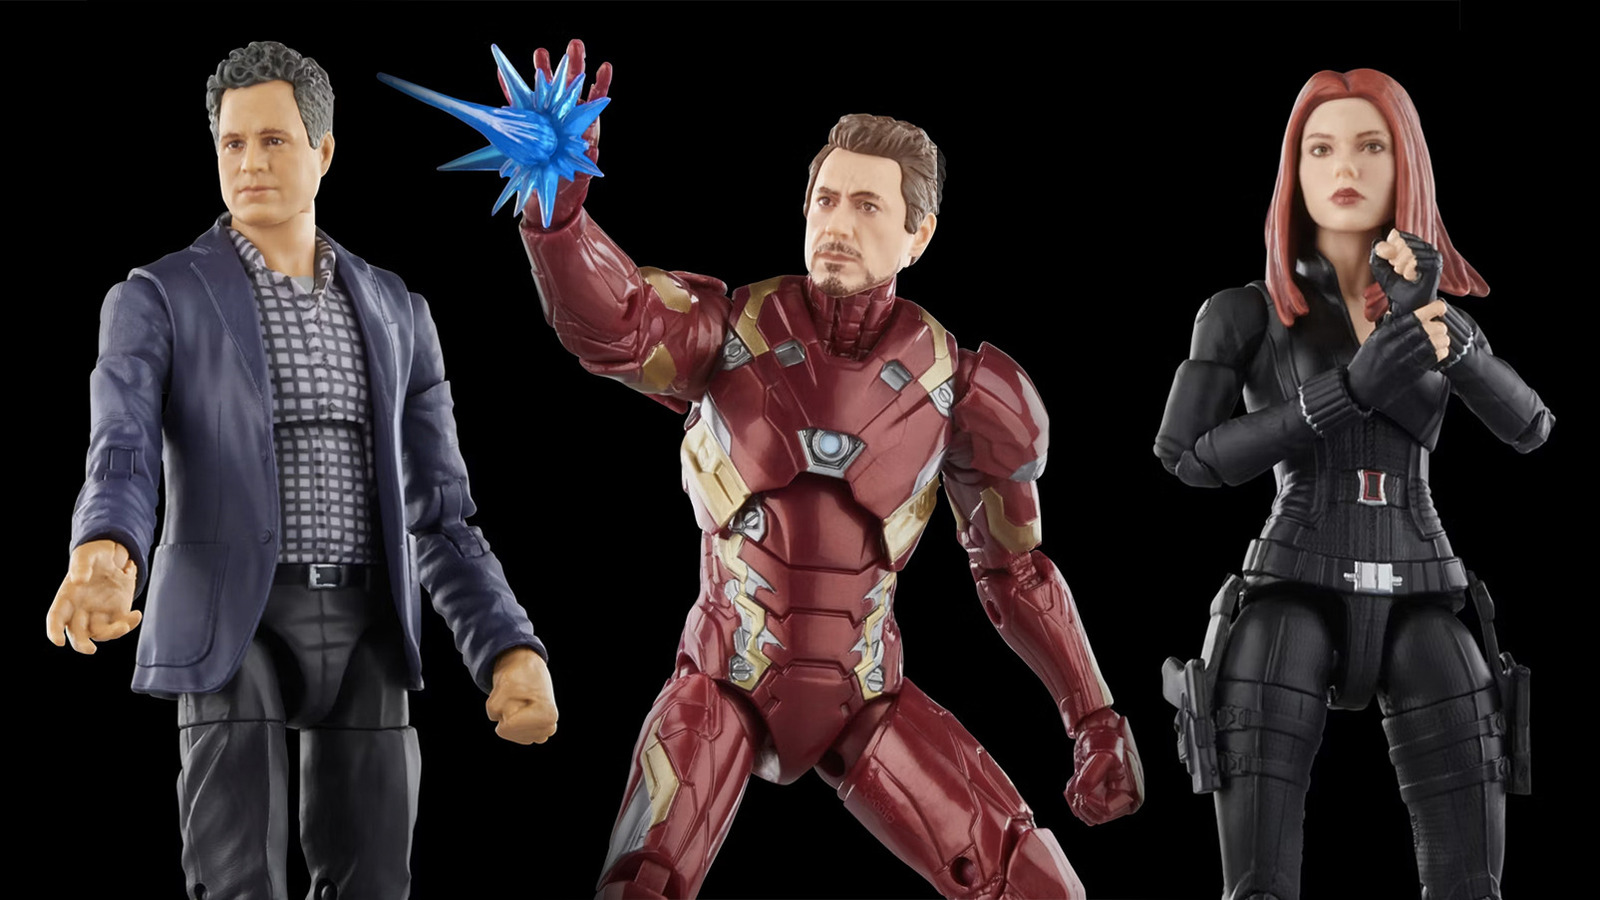 Marvel Legends Returns To The Infinity Saga With Improved Figures